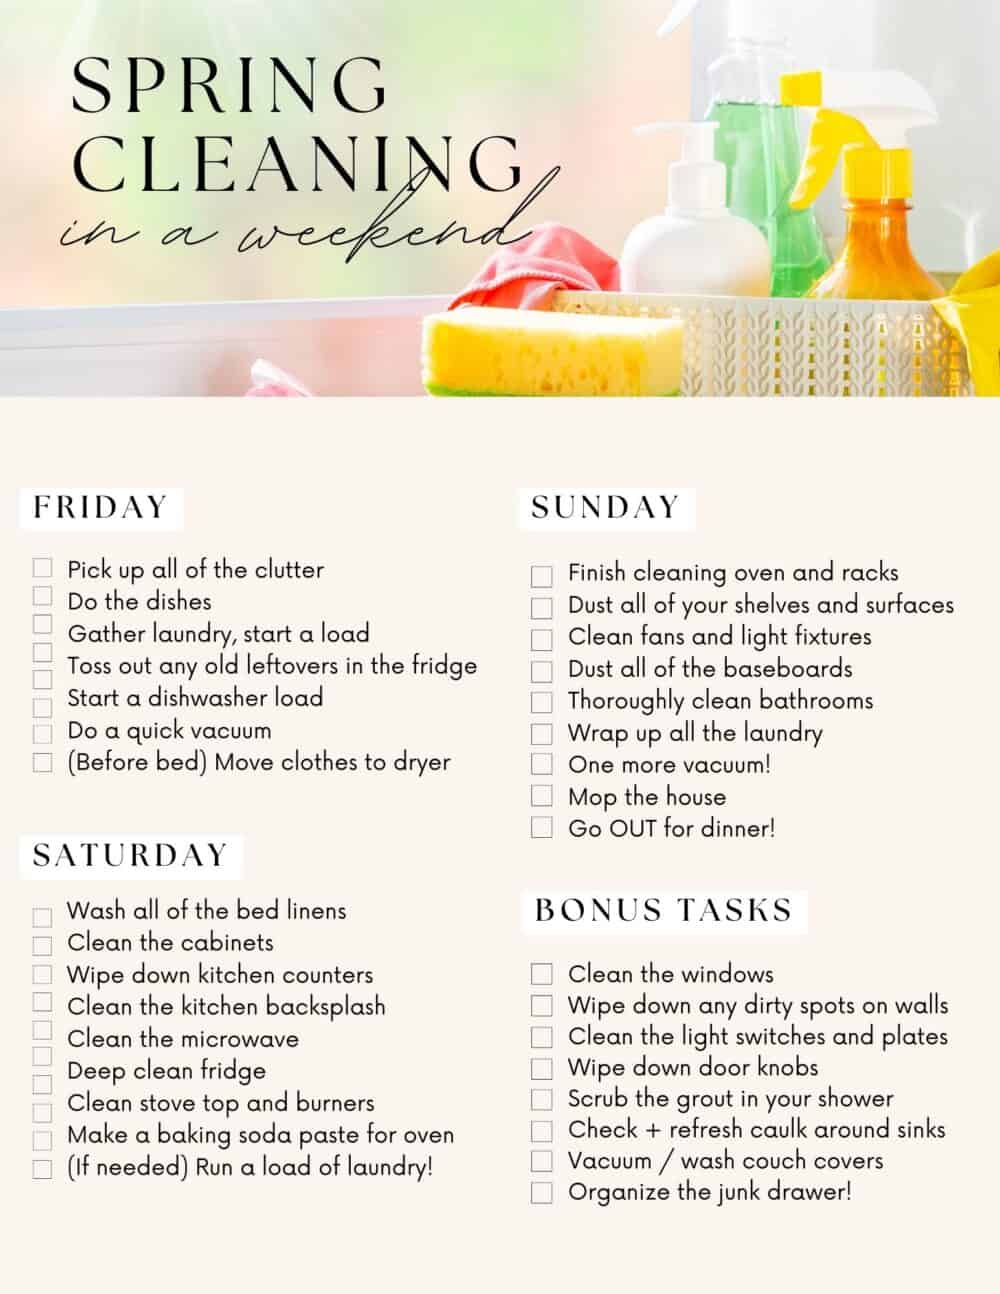 Spring Cleaning Tips: How to Spring Clean Your Apartment